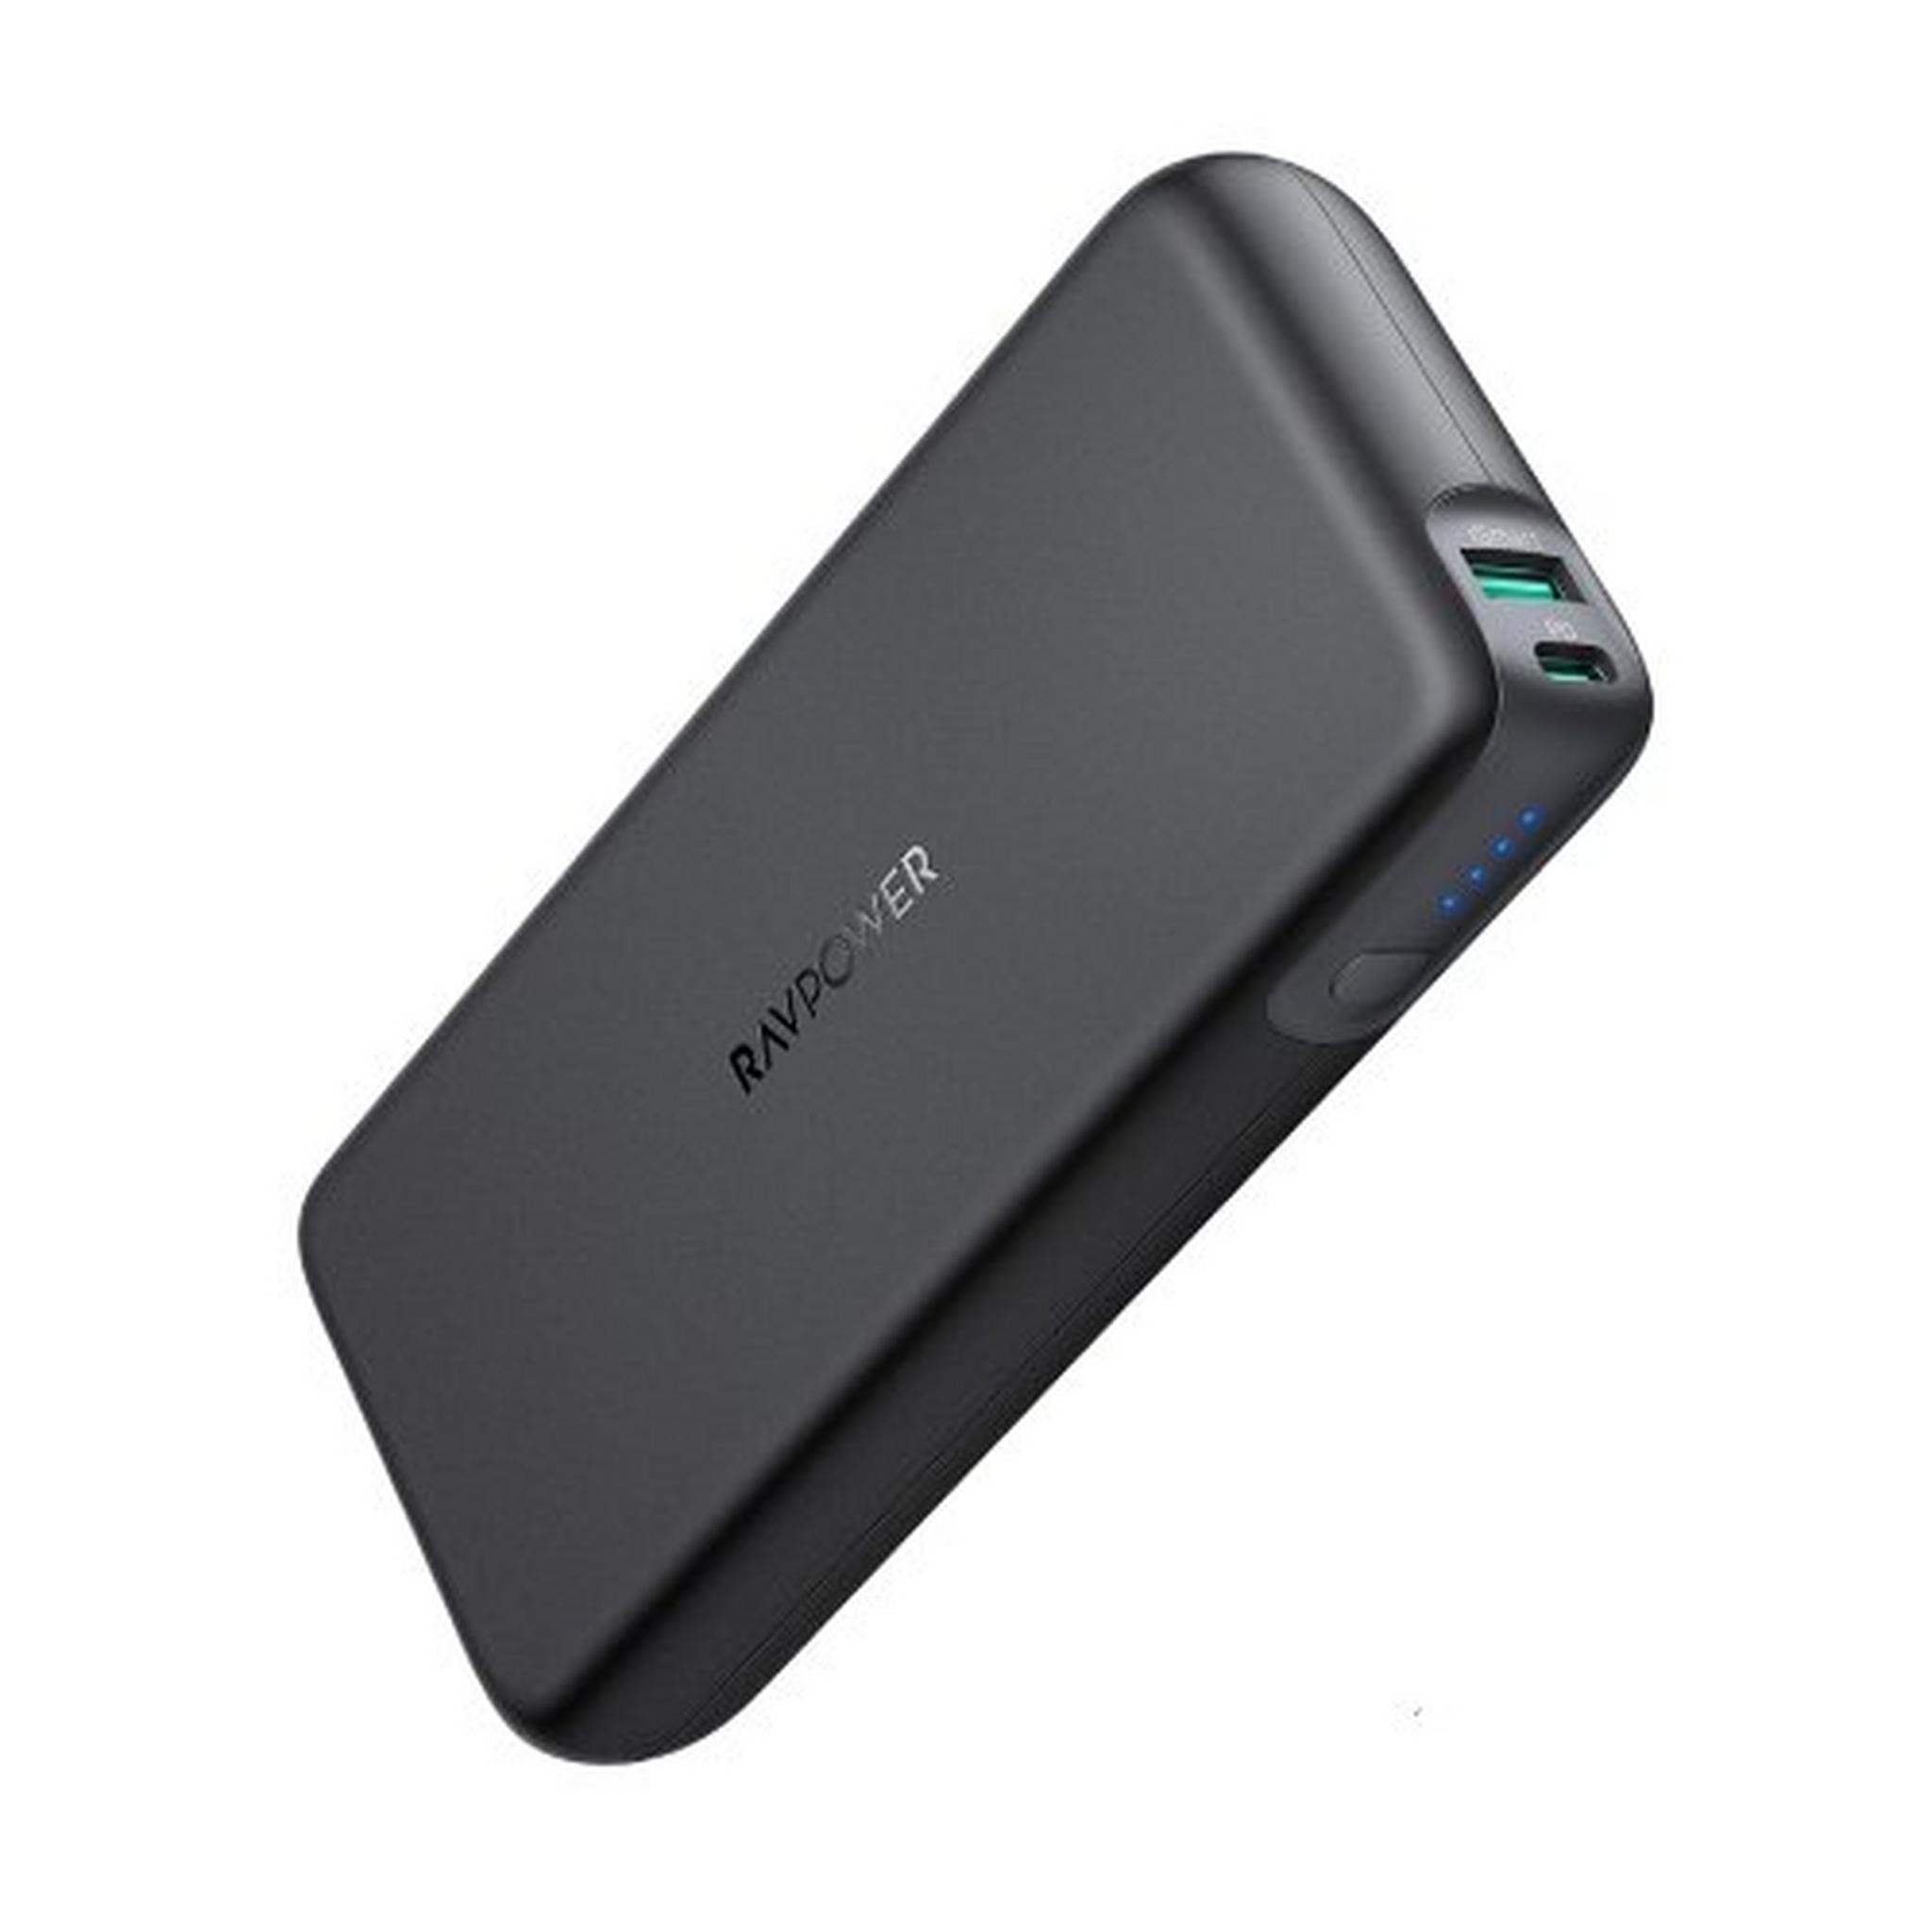 RAVPower PD Pioneer 20000mAh 60W 2-Port Portable Charger - Black